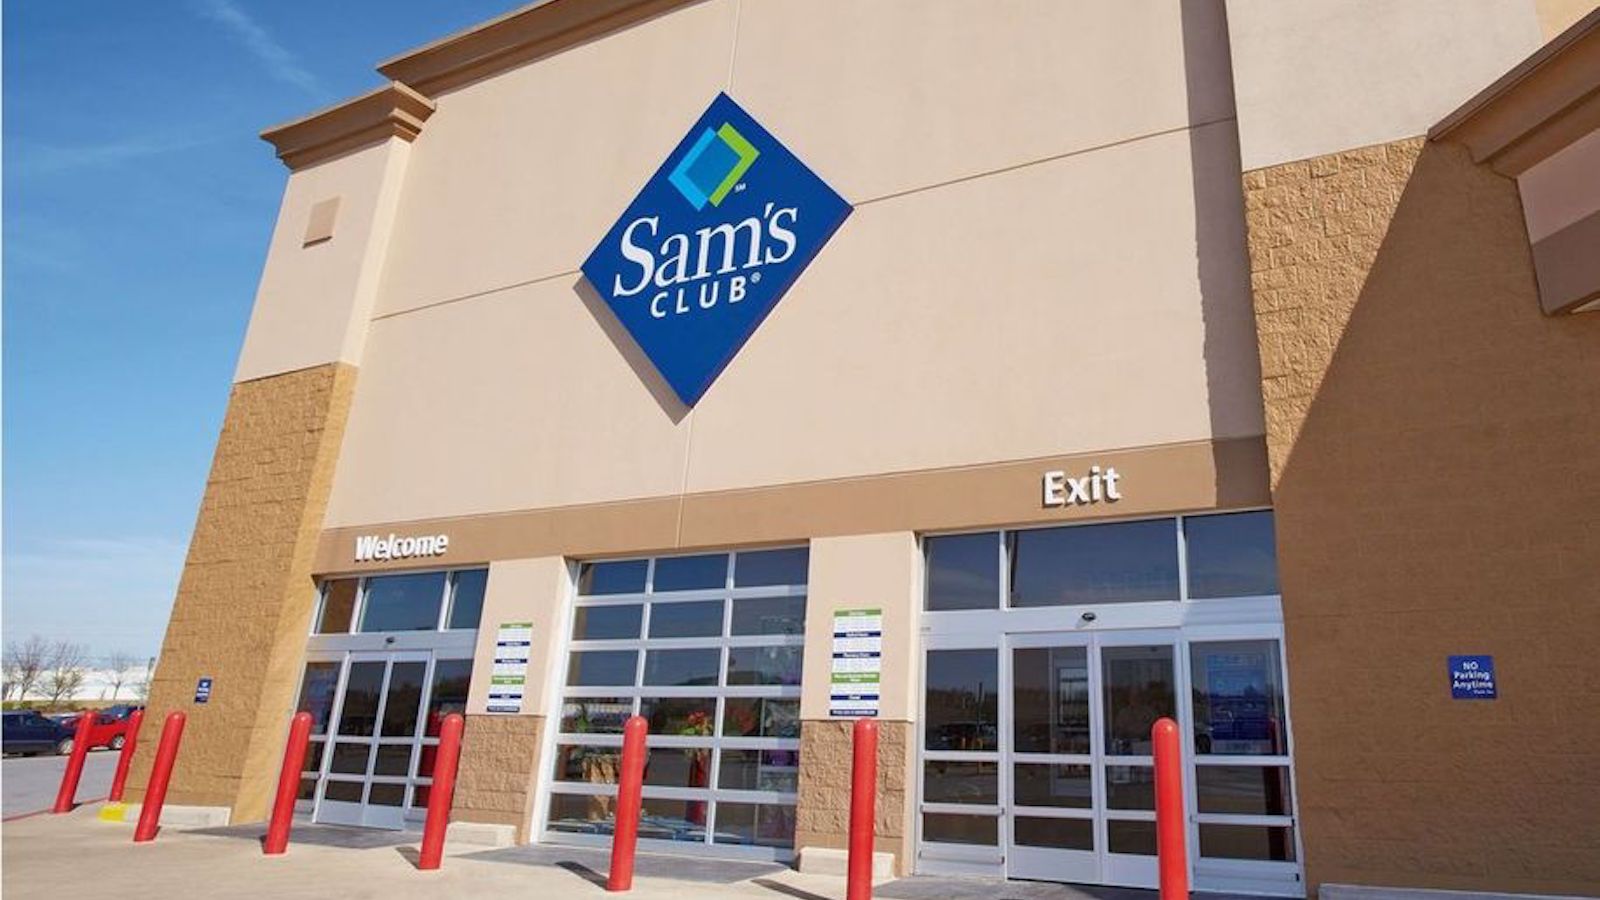 Start saving money today with this discounted Sam's Club membership and  freebies